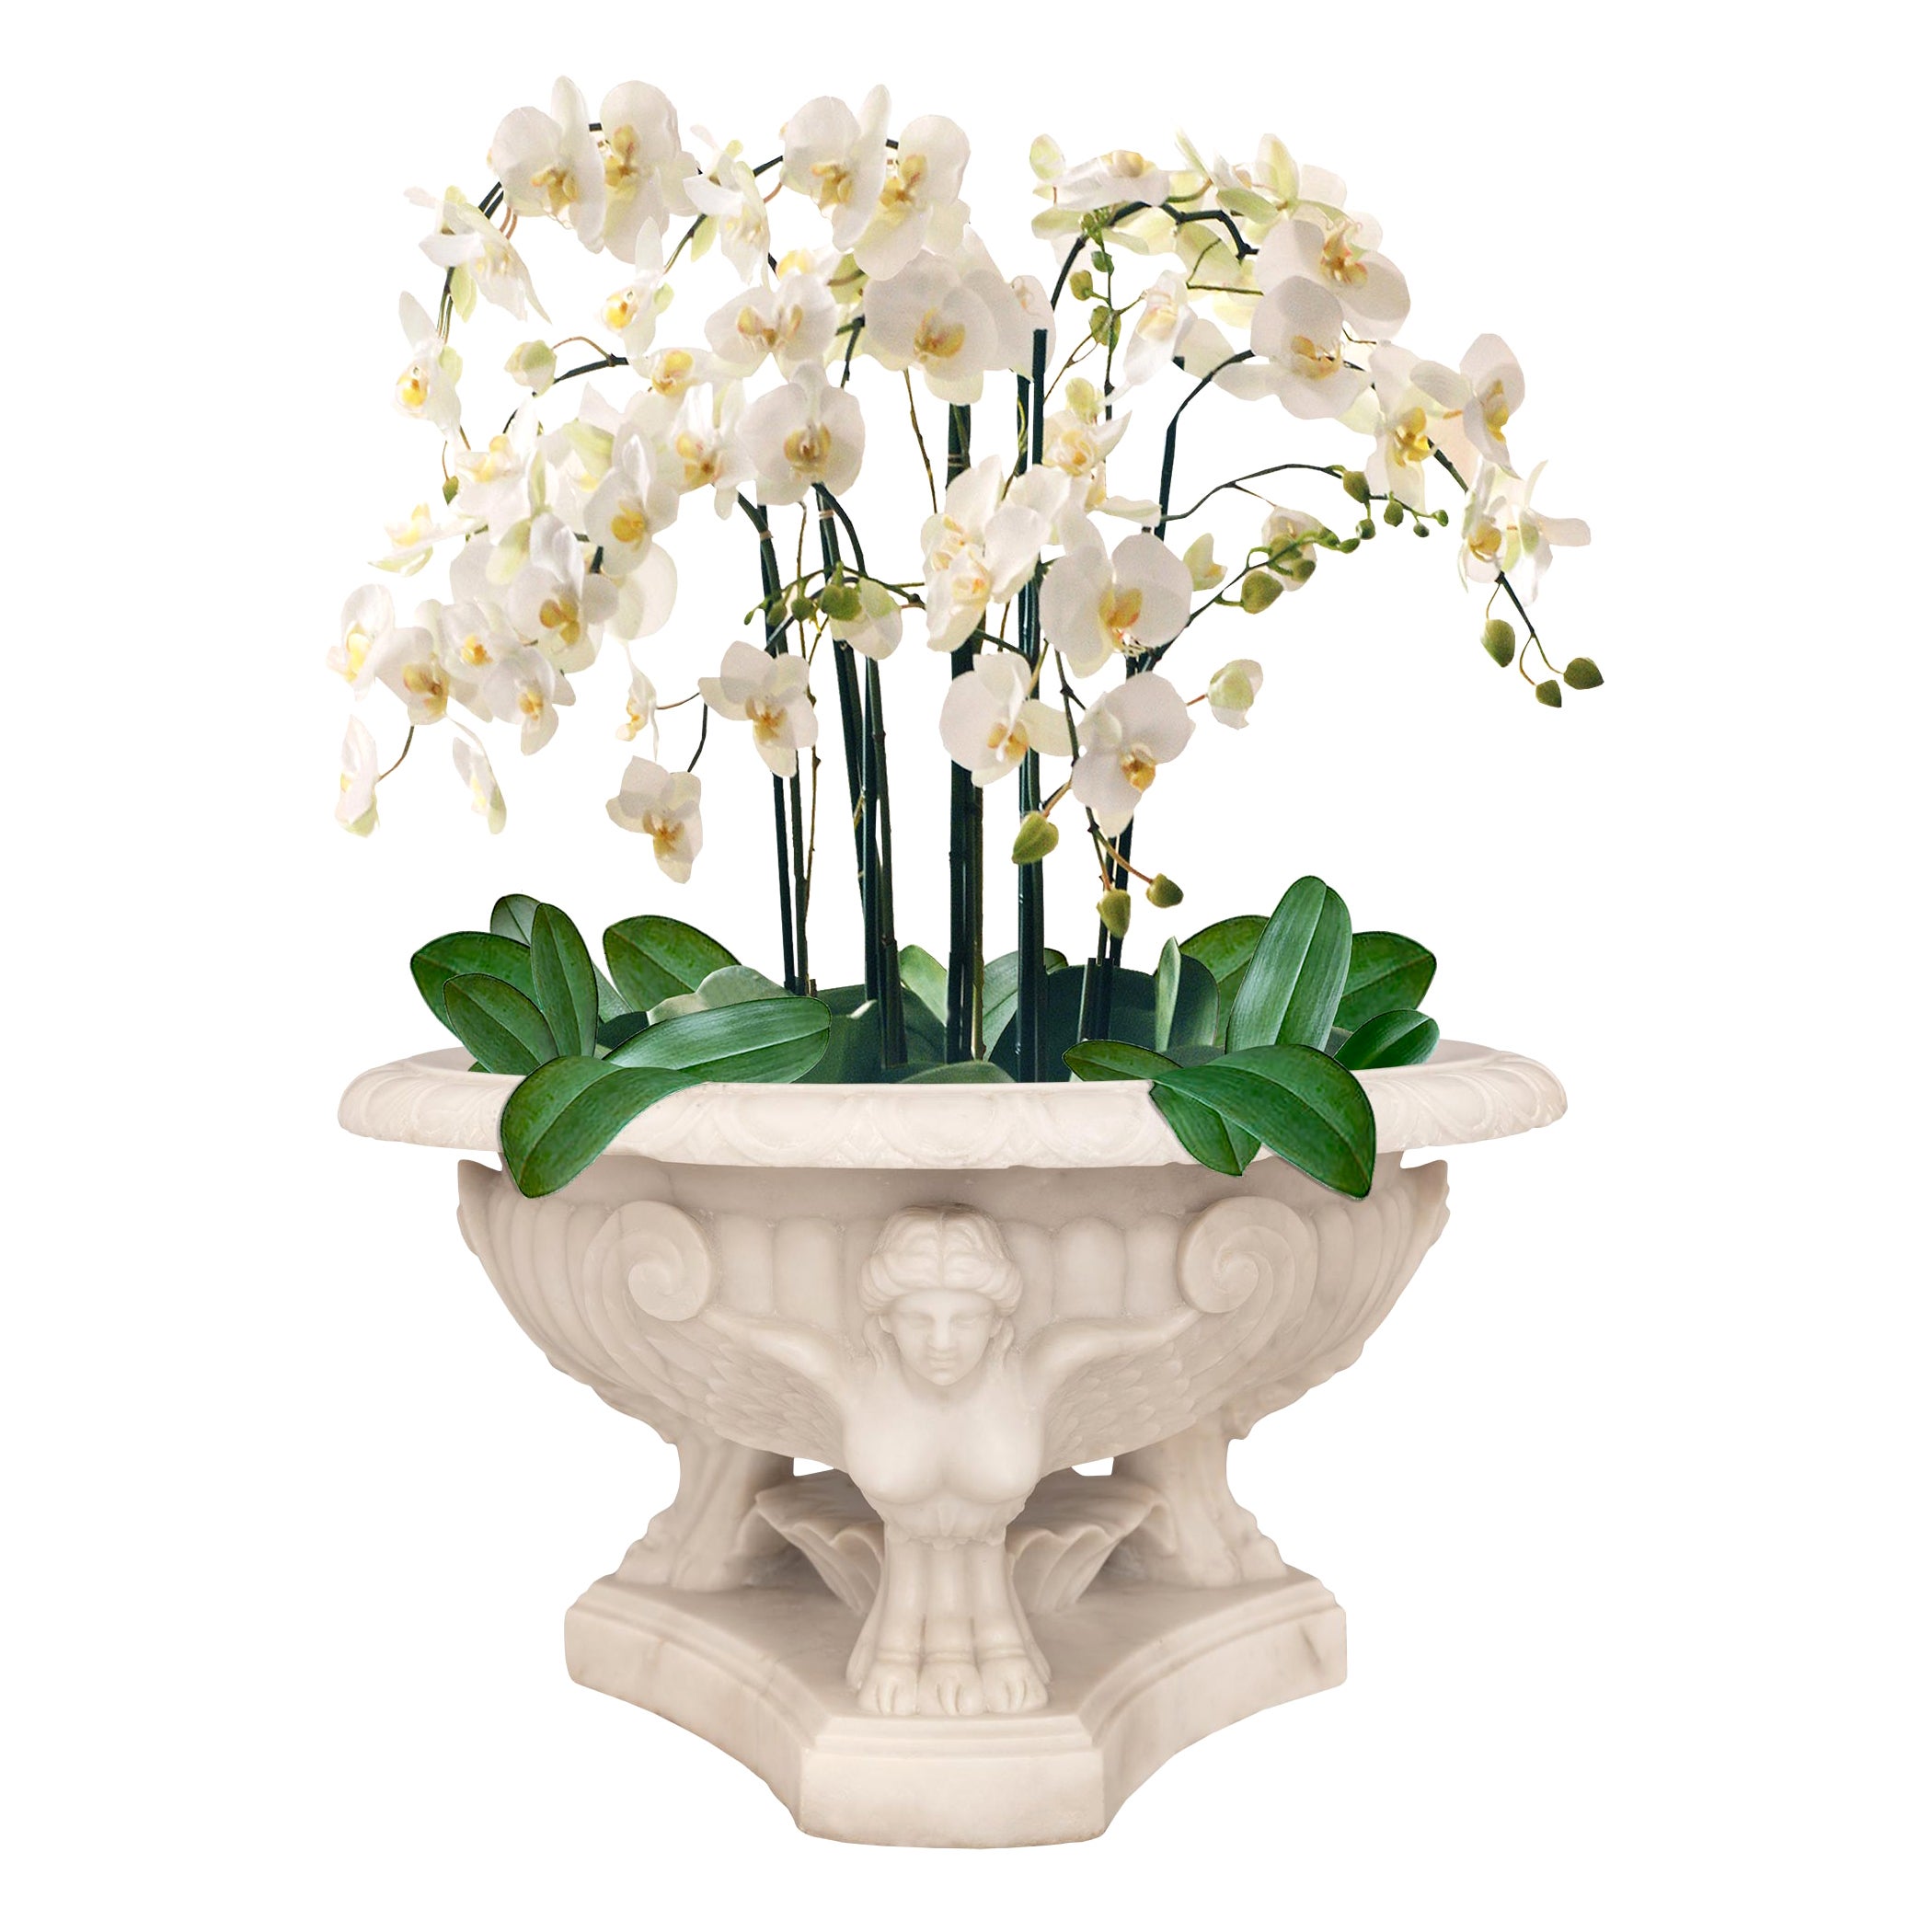 Italian 19th Century Neo-Classical St. White Carrara Marble Centerpiece Bowl For Sale